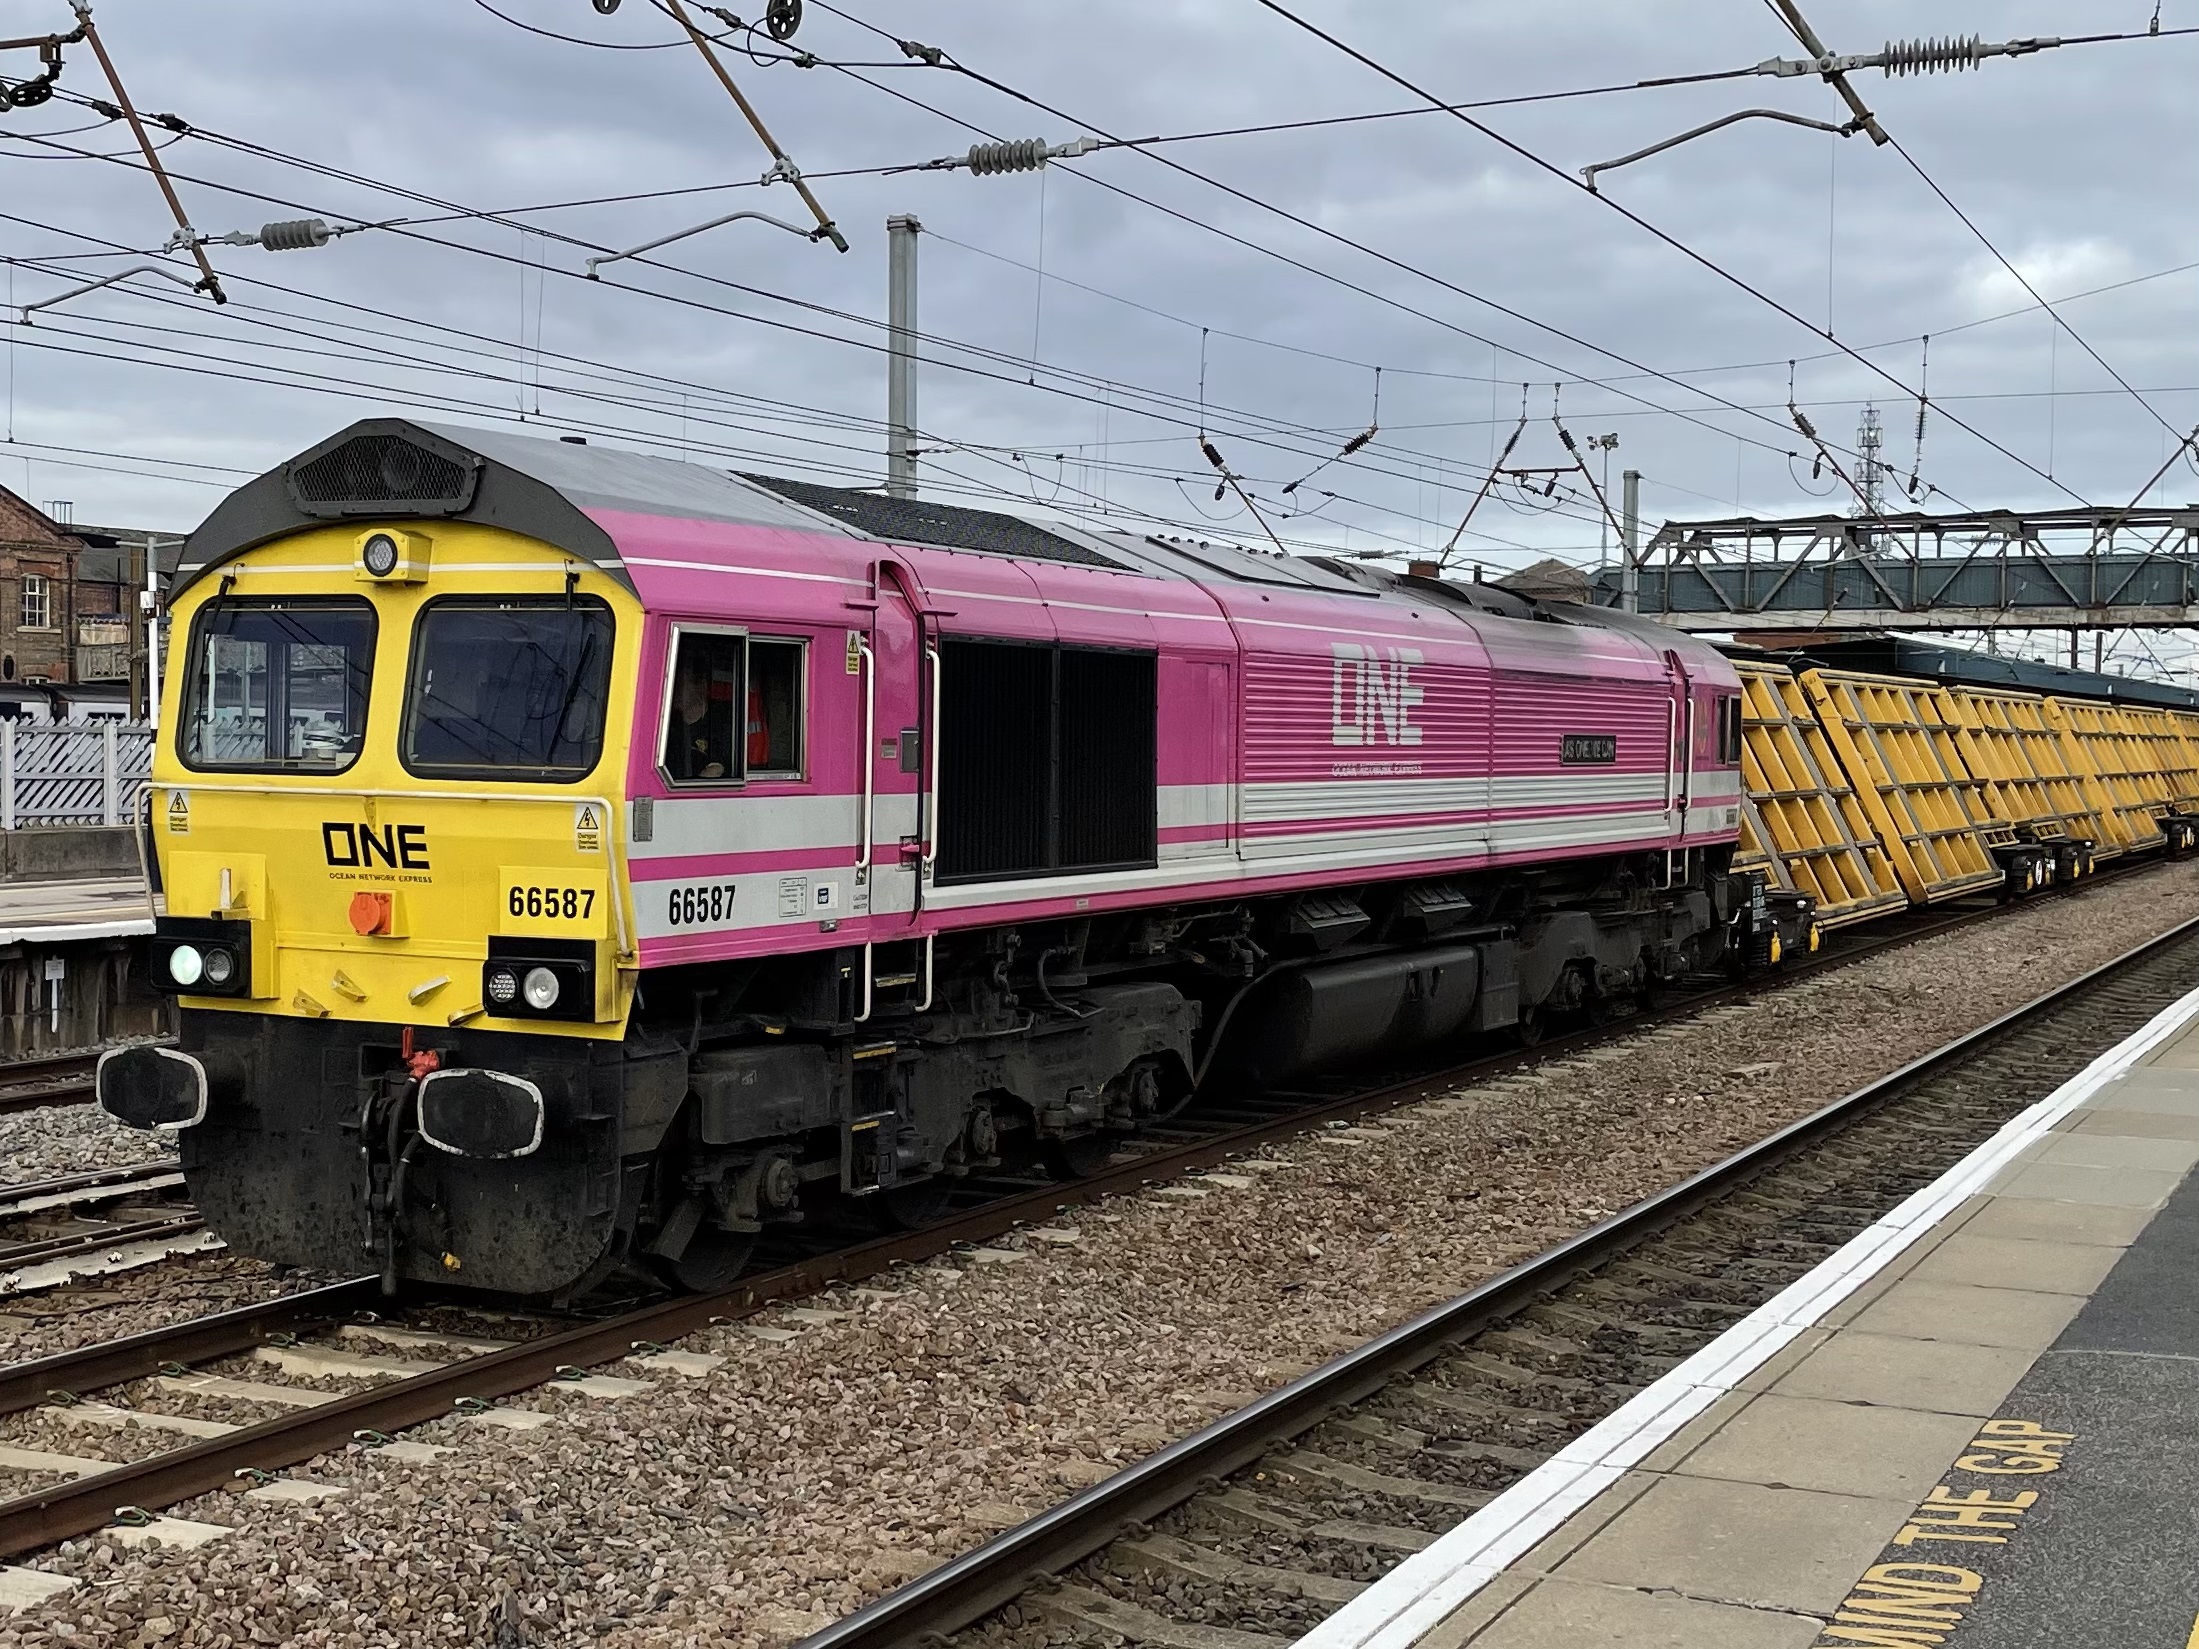 Freightliner 66587 "As One We Can" in its new striking Ocean Network Exp magenta livery following Freightliner’s partnership with ONE : Image Credit - Peter Hughes